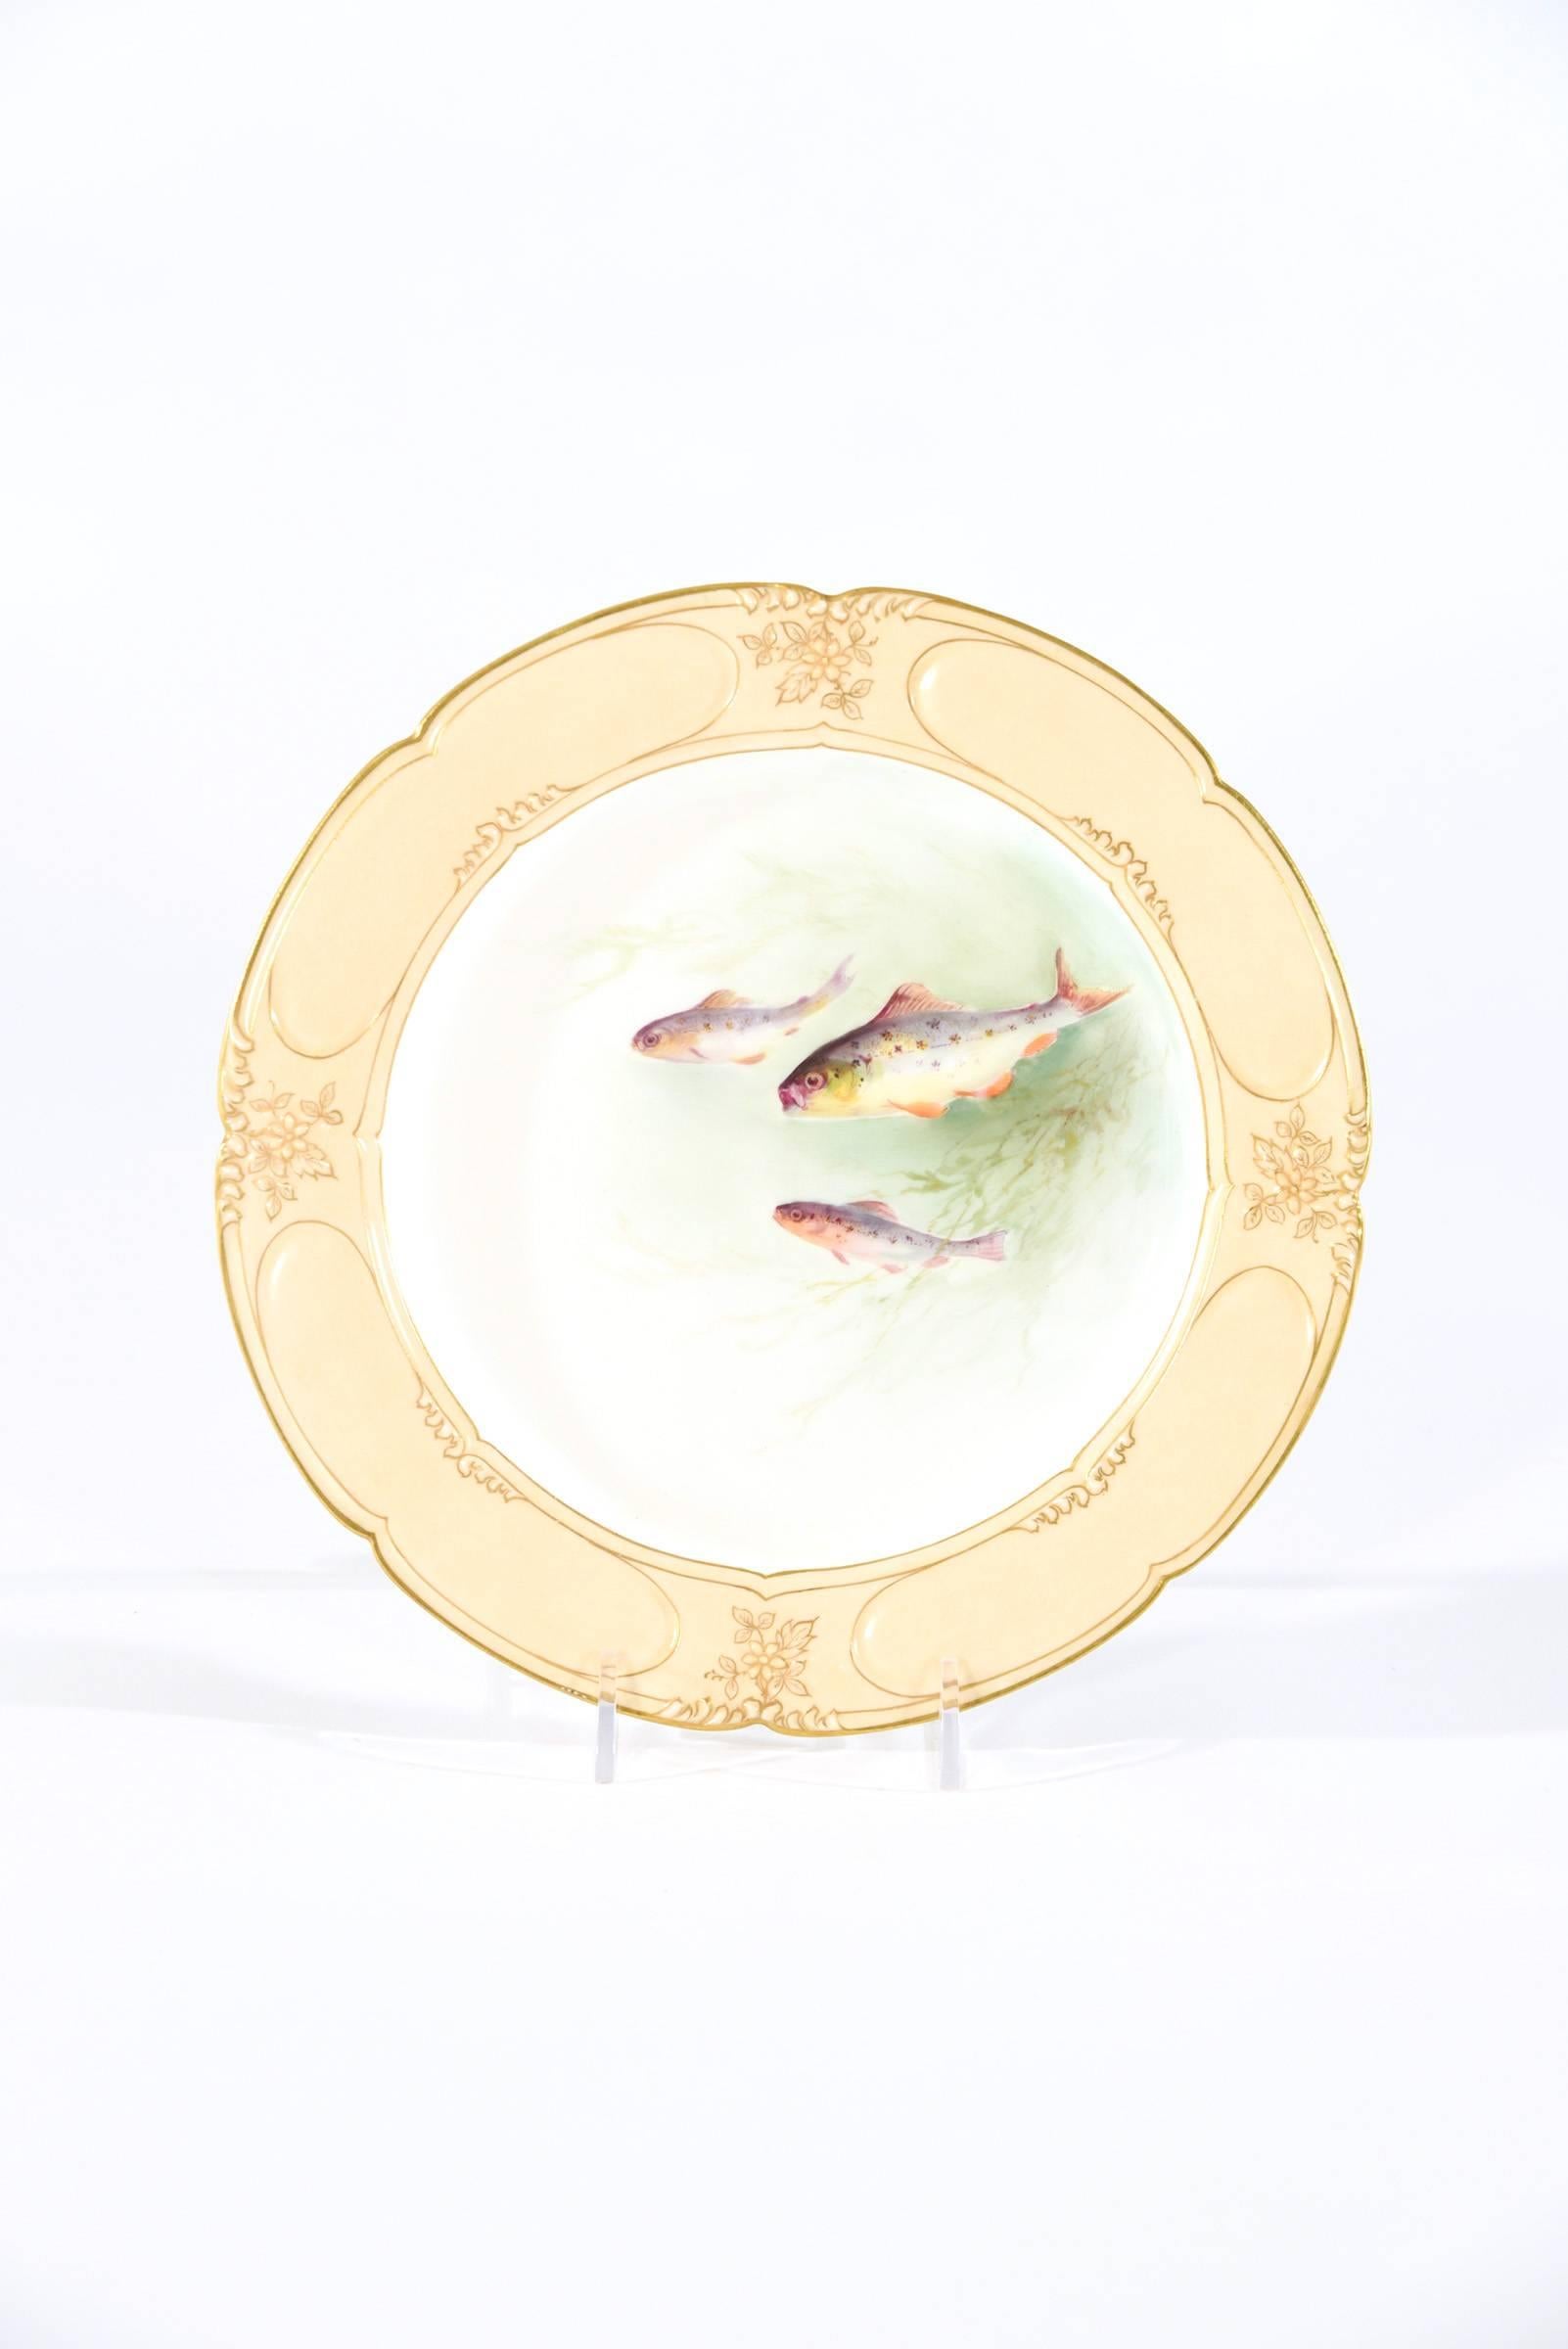 This set of 12 Doulton Burslem plates dates from the 1890s and are decorated in the Aesthetic Movement style. Each plate is uniquely hand painted with different underwater scenes of fish in motion in their natural habitat. The caramel colored border